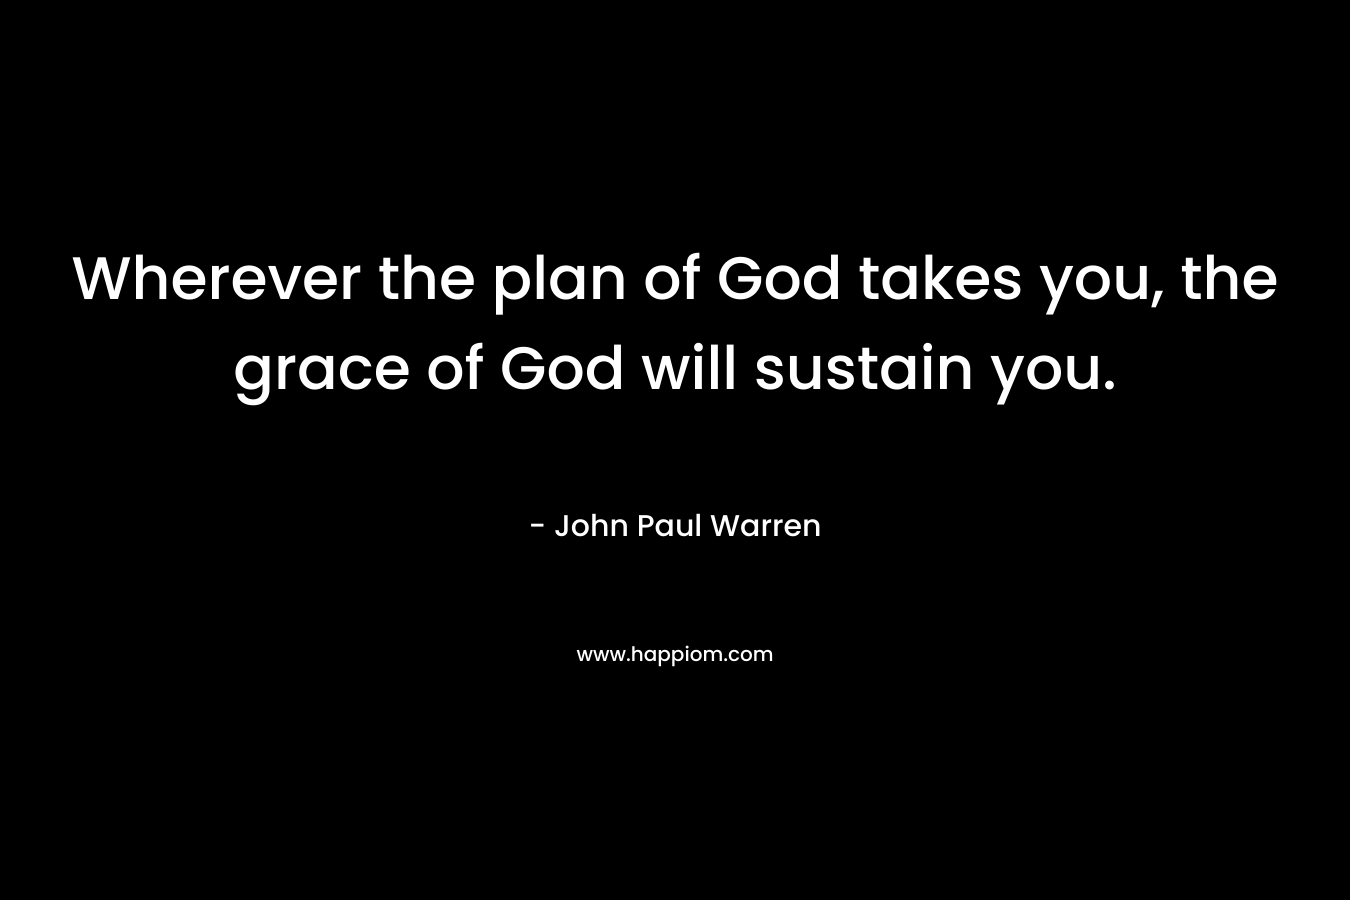 Wherever the plan of God takes you, the grace of God will sustain you.